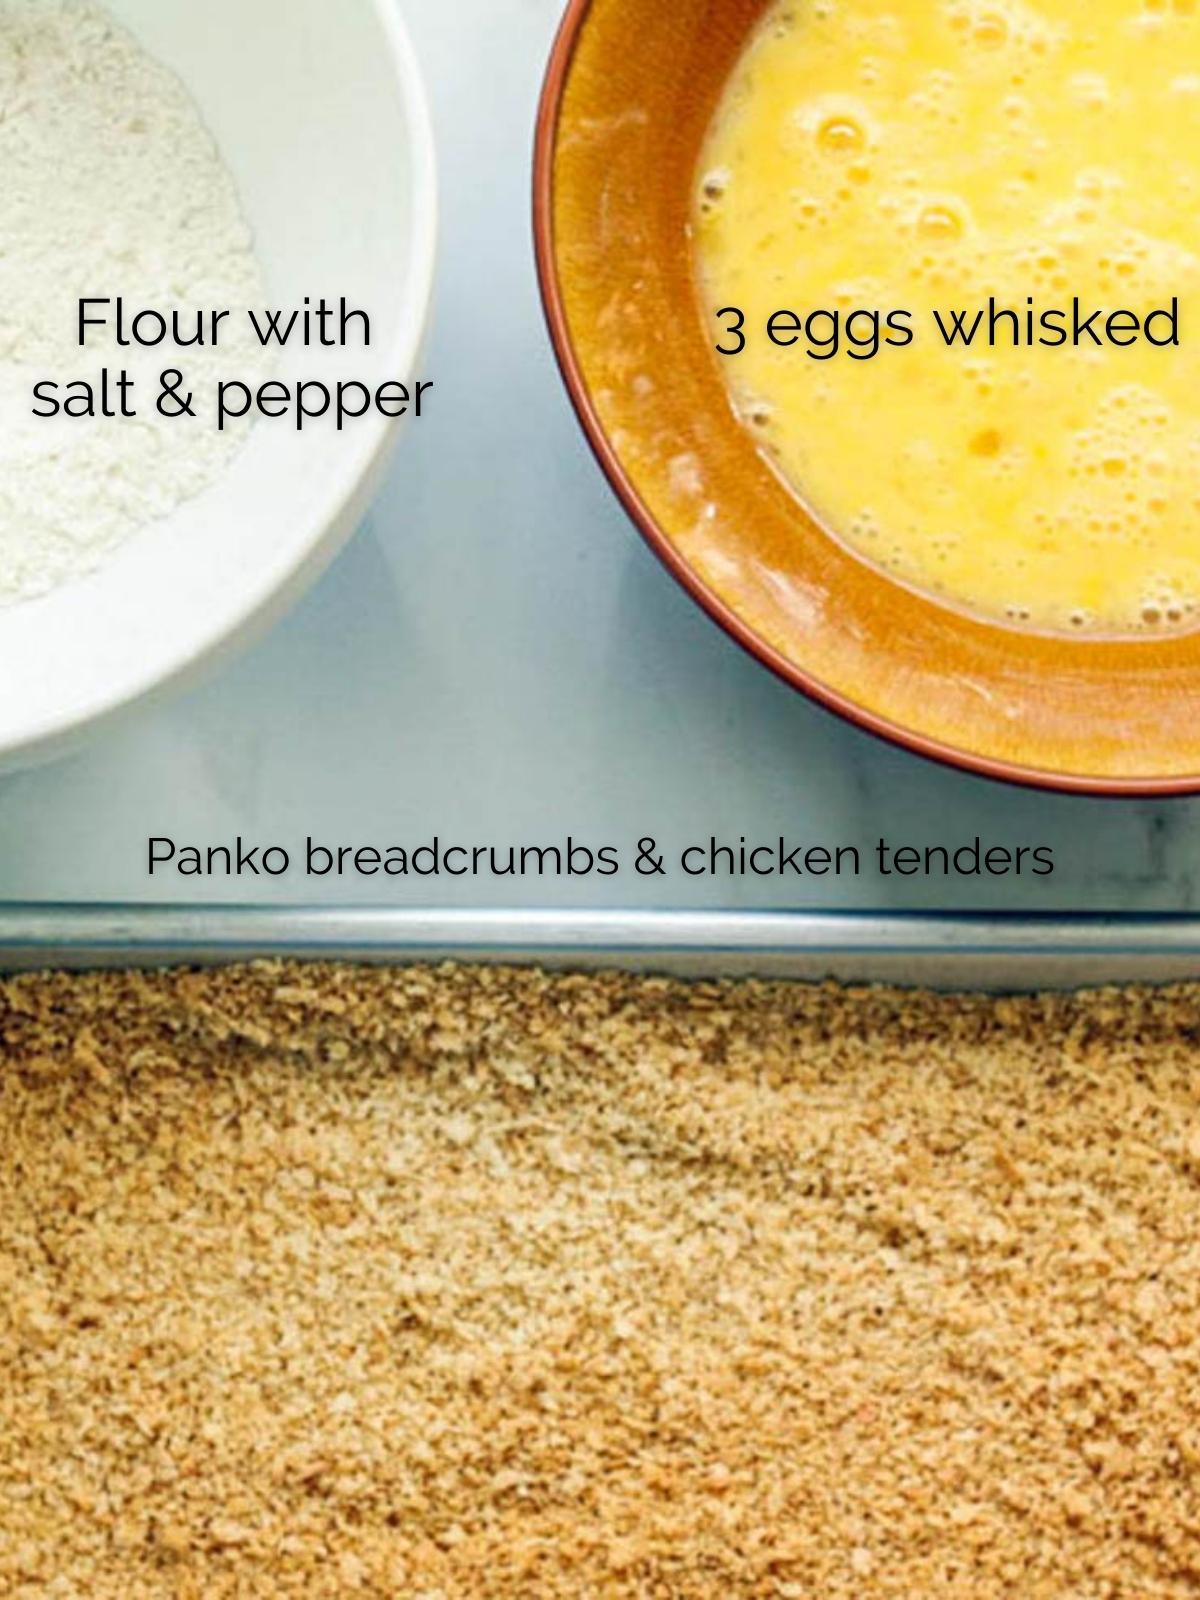 panko breadcrumbs on a baking sheet next to 2 bowls, one filled with whisked eggs and the other filled with flour, salt and pepper